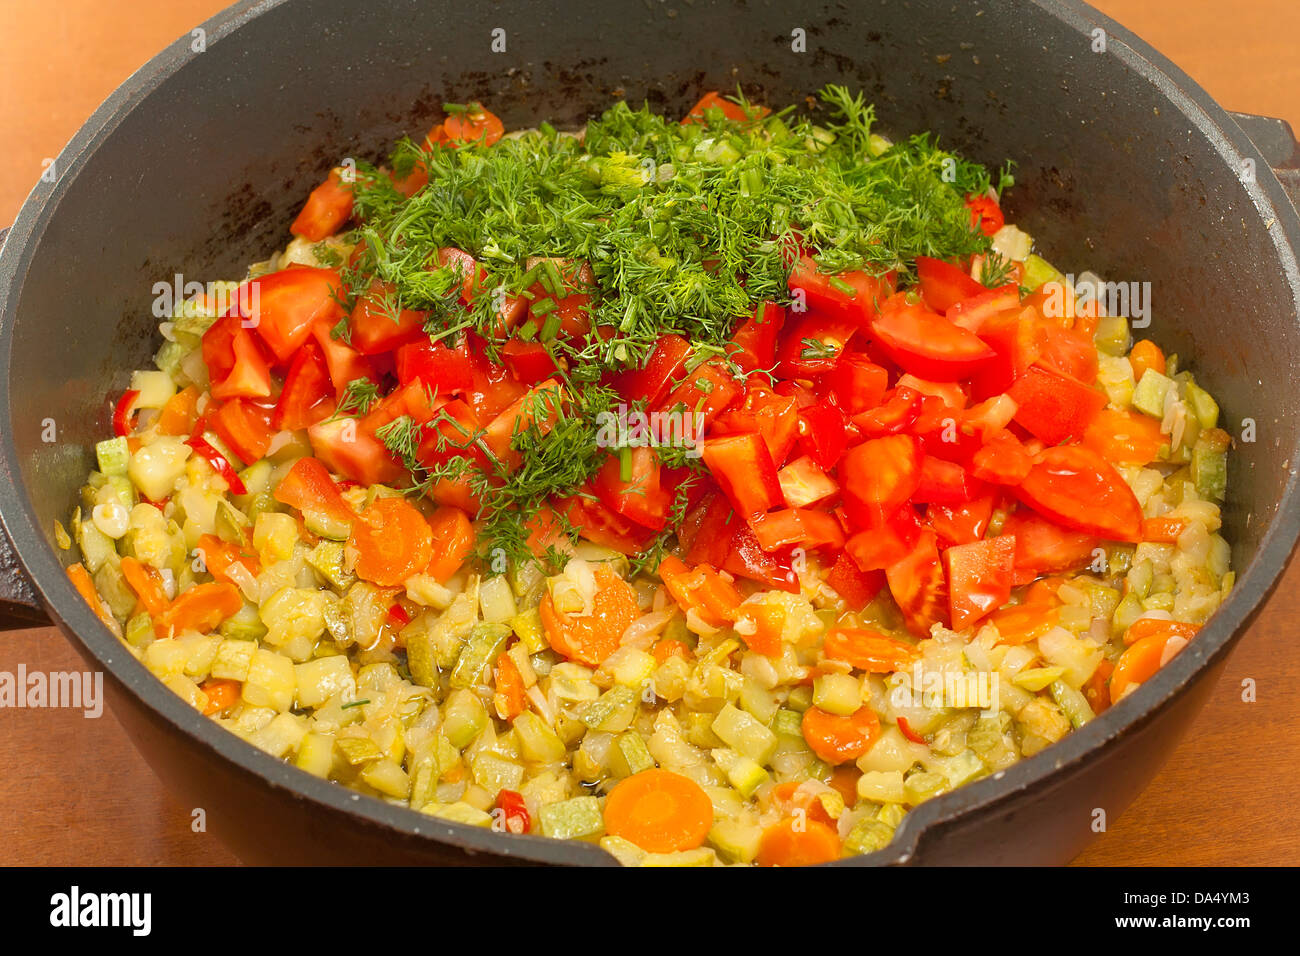 cooking saute courgettes in the cauldron Stock Photo